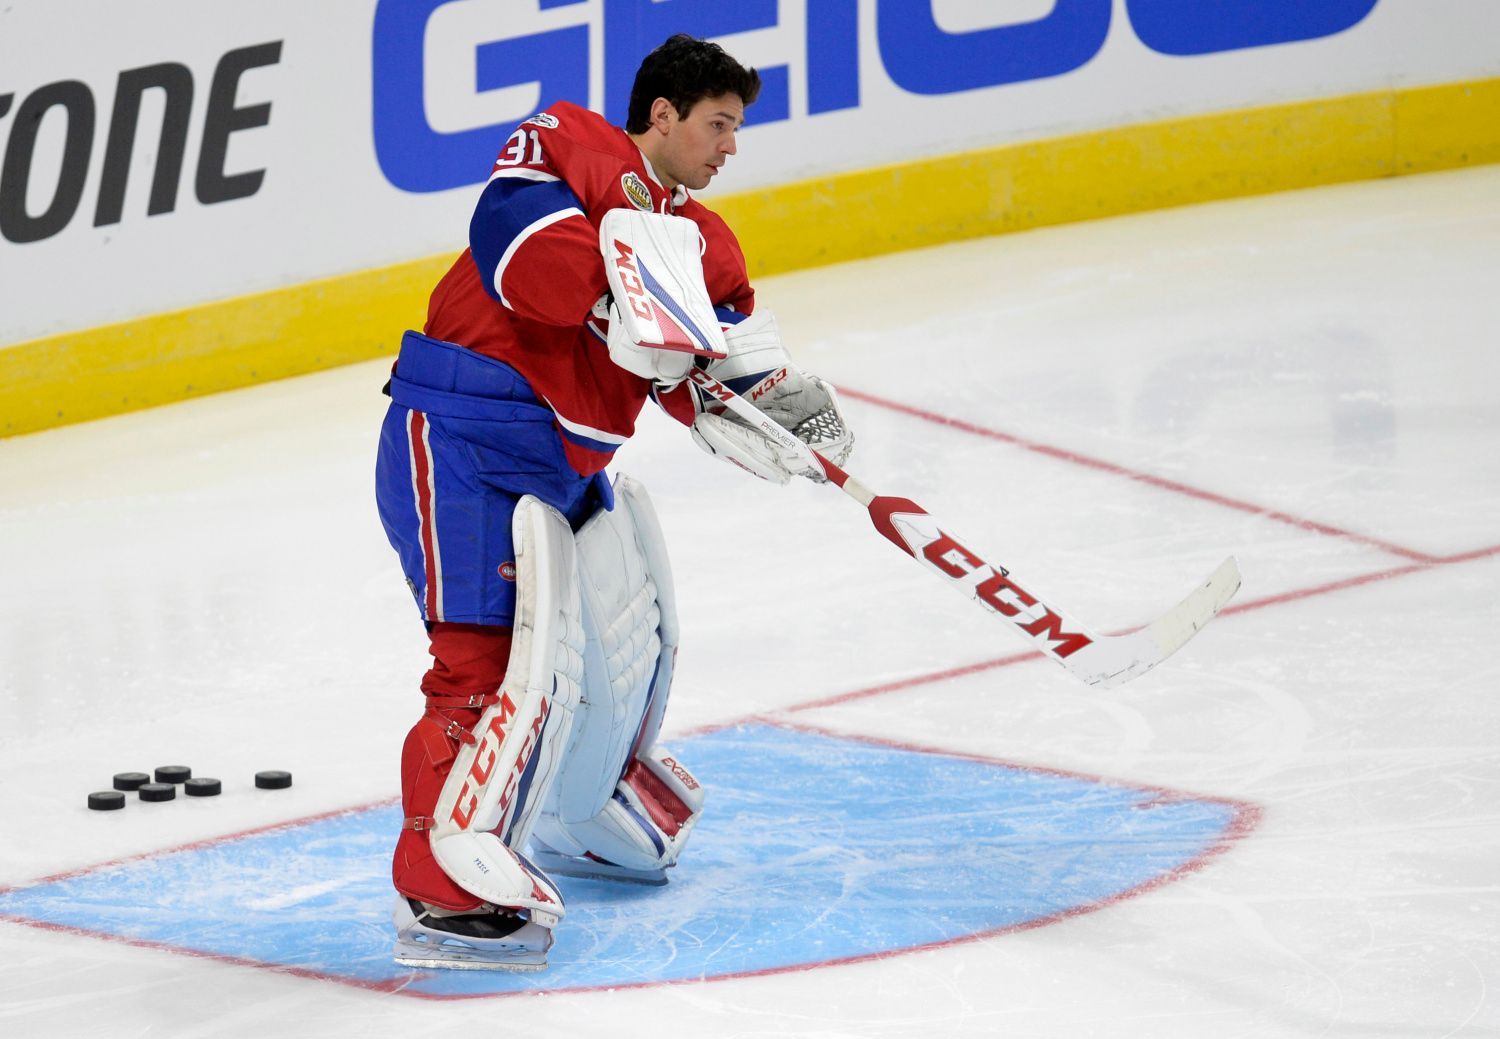 2017 NHL All Star Game: Carey Price, Montreal